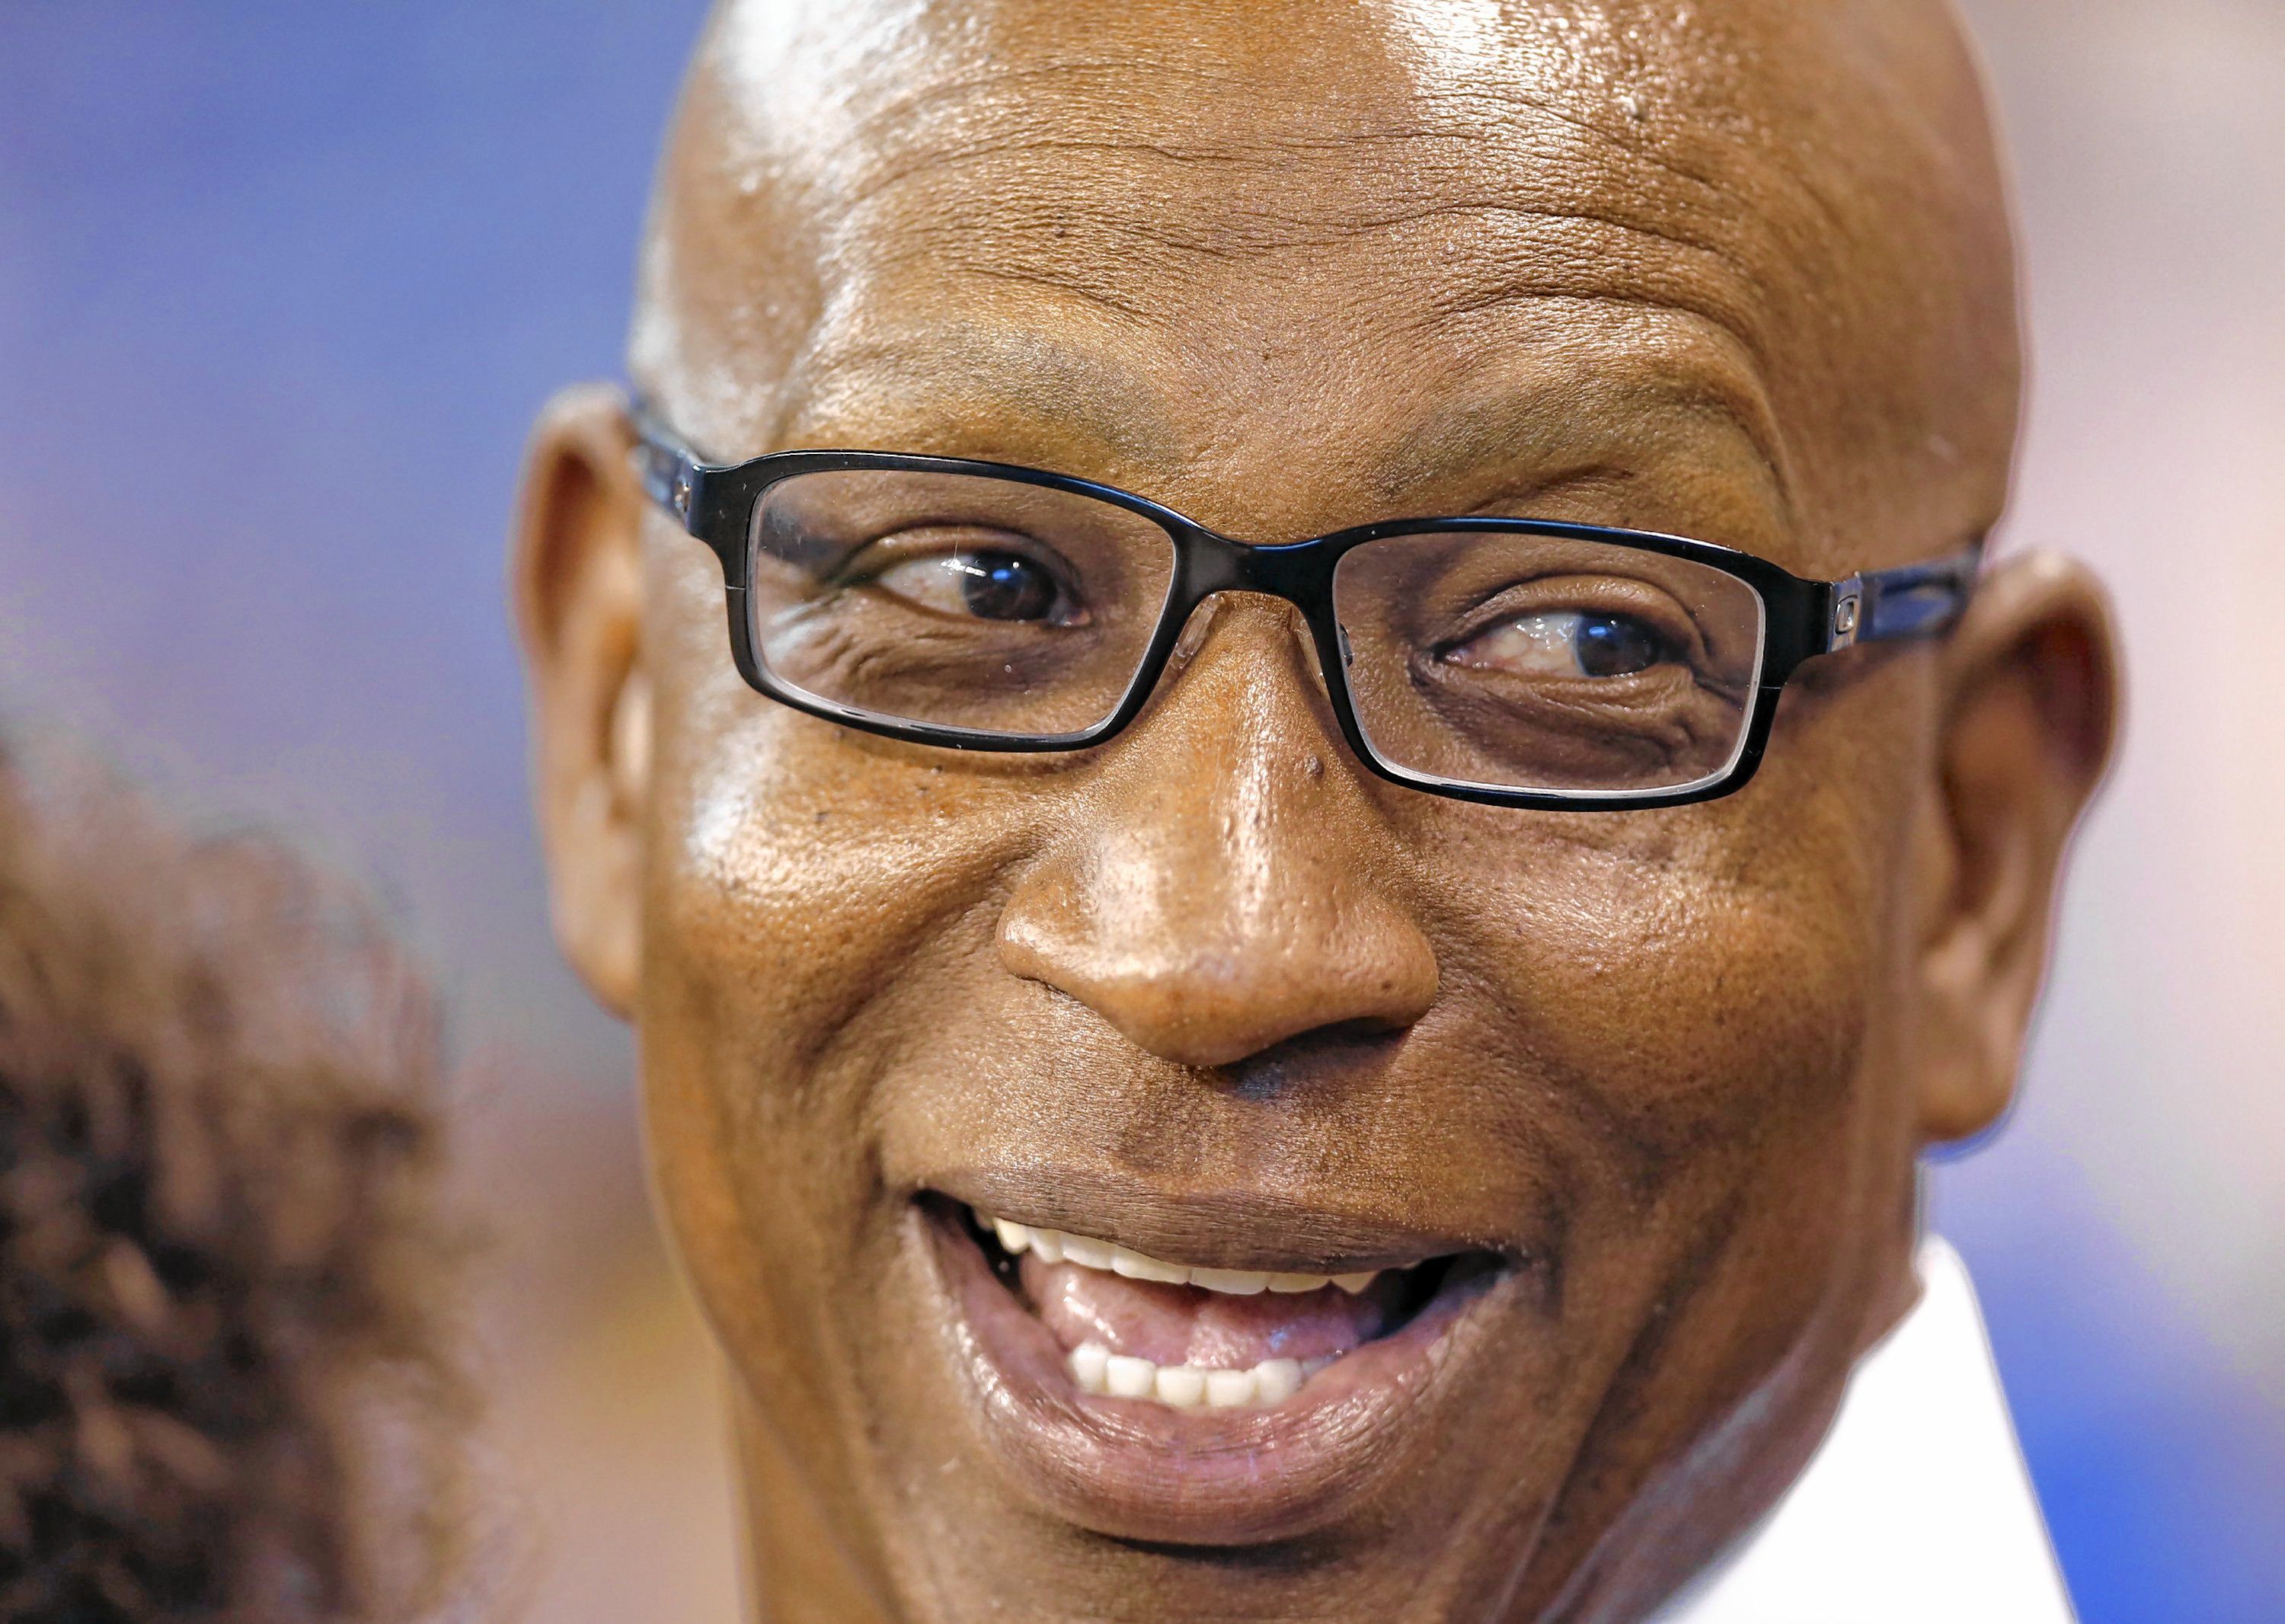 Former Colts player Eric Dickerson will be honored but the Colts at halftime on Sunday, Dec. 15, 2013, in Indianapolis. (Sam Riche/MCT)